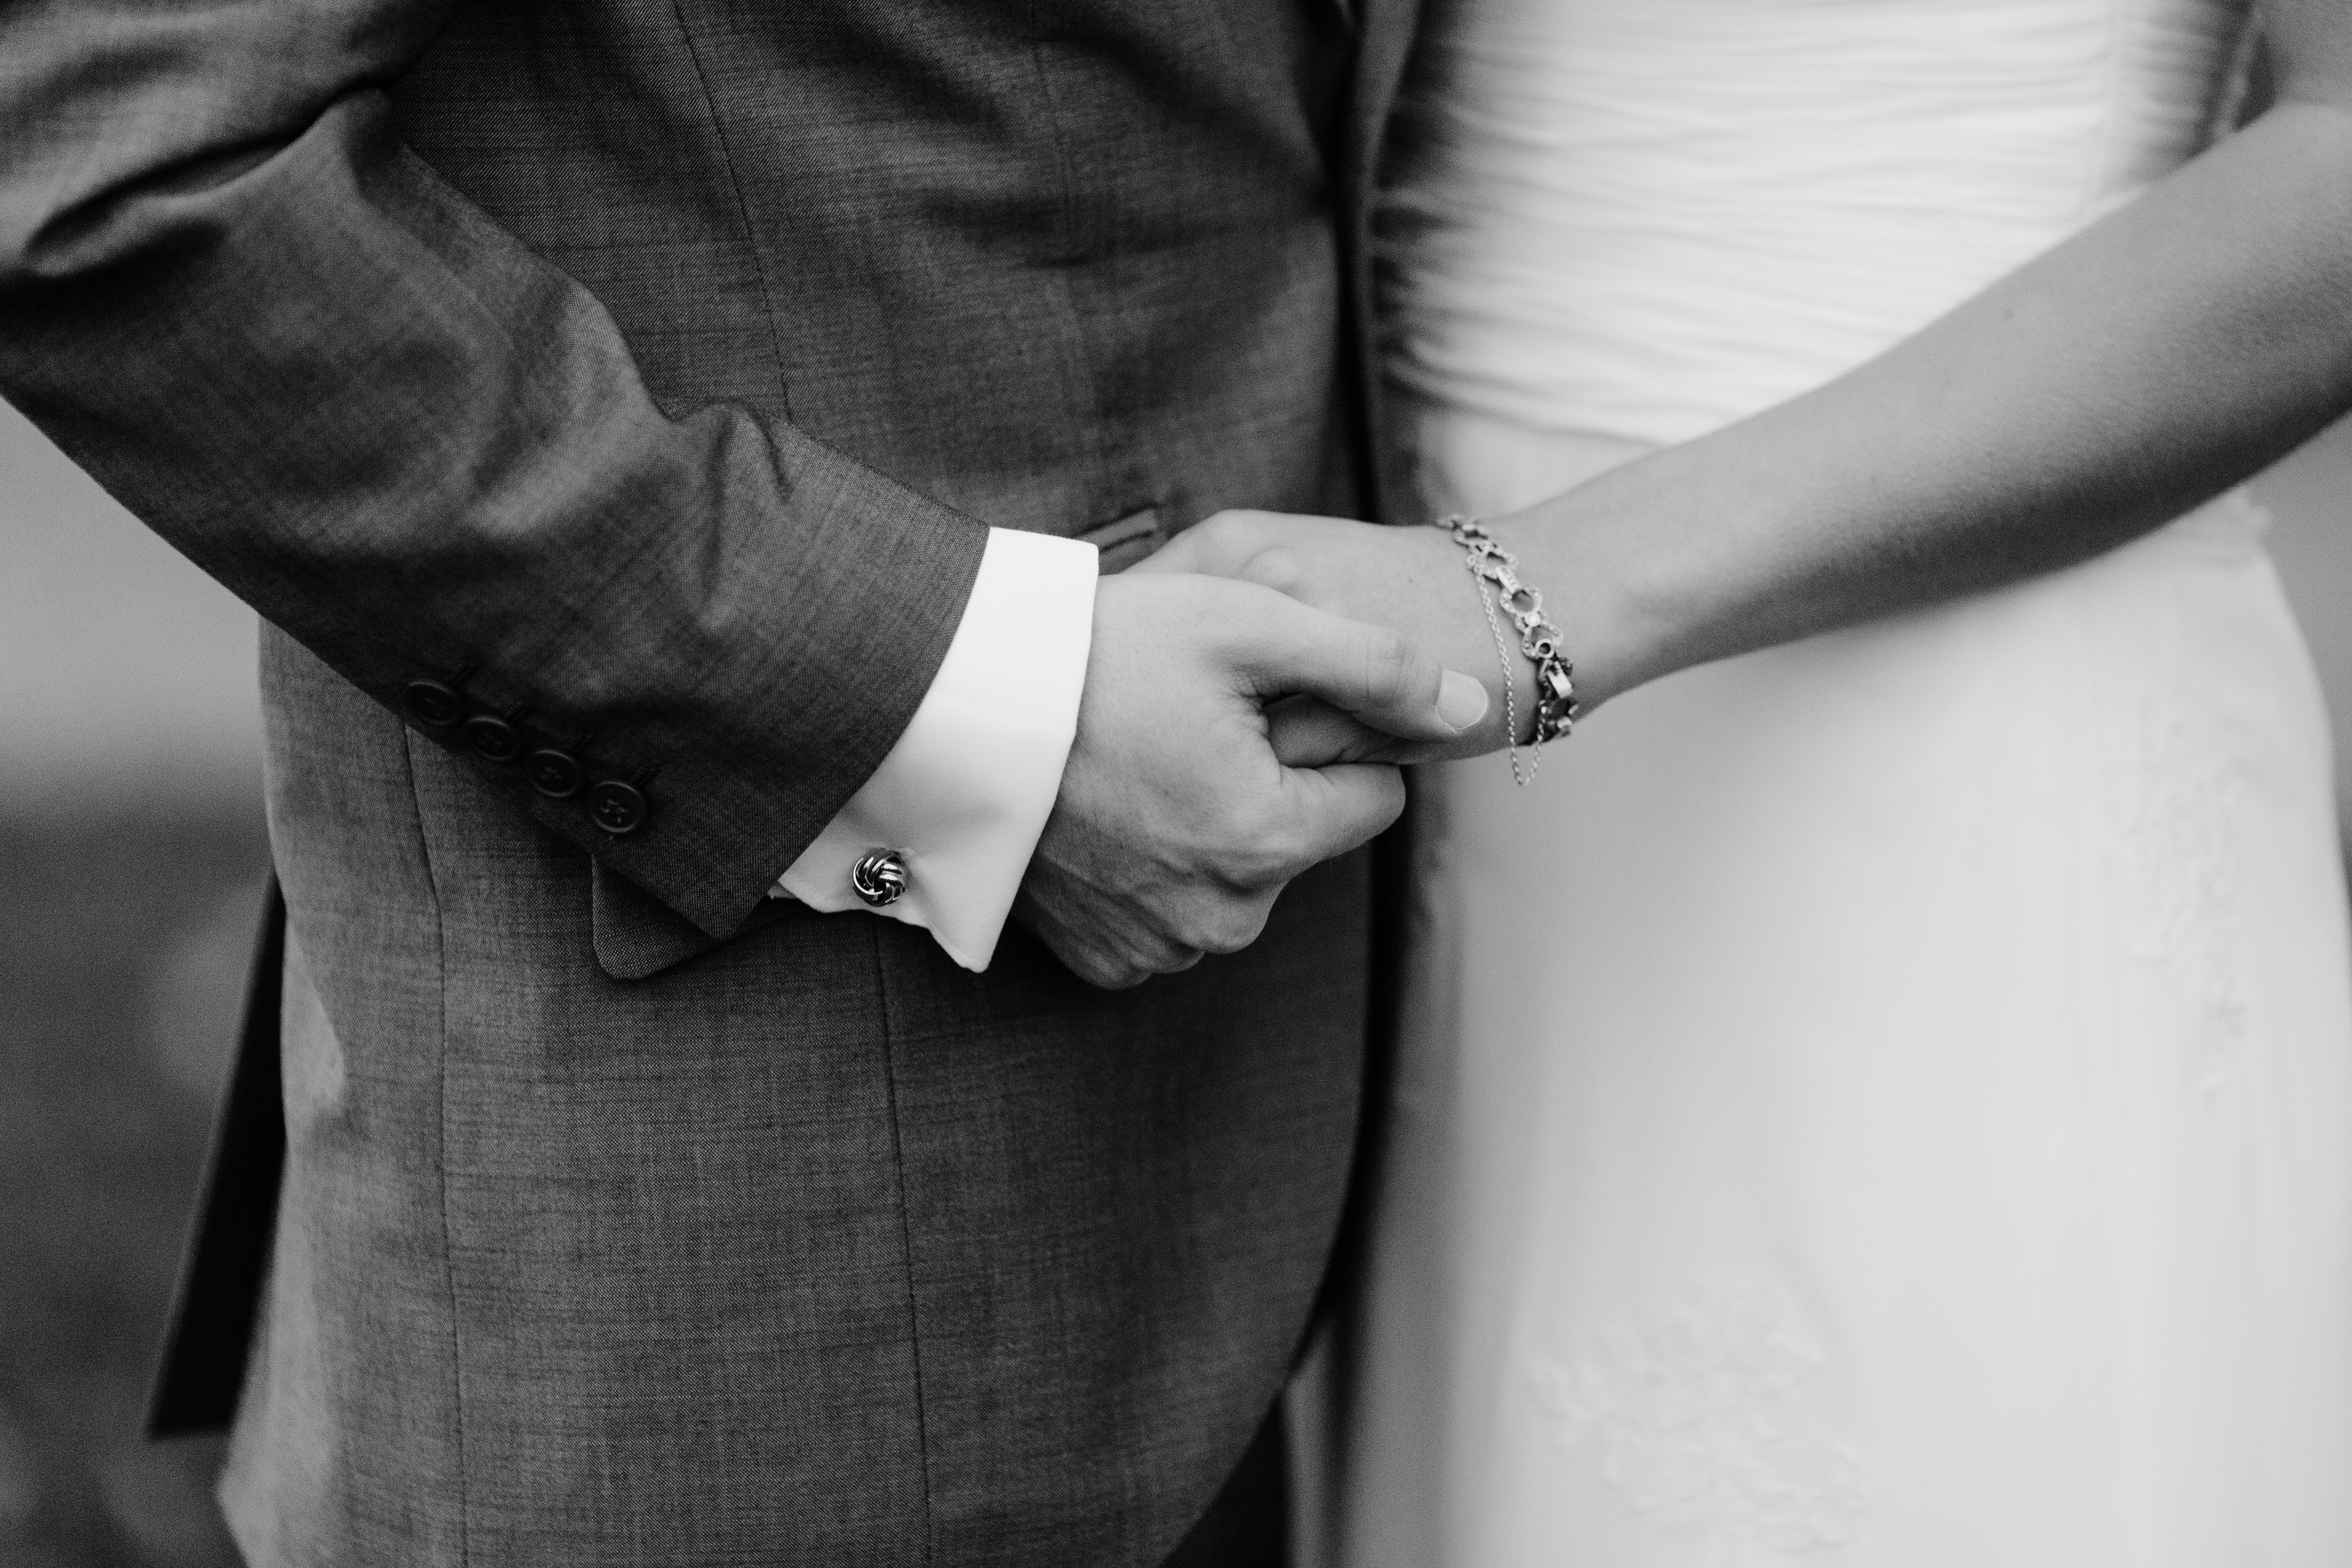 couple, chb, love, pair, hands, bw, newlyweds Aesthetic wallpaper